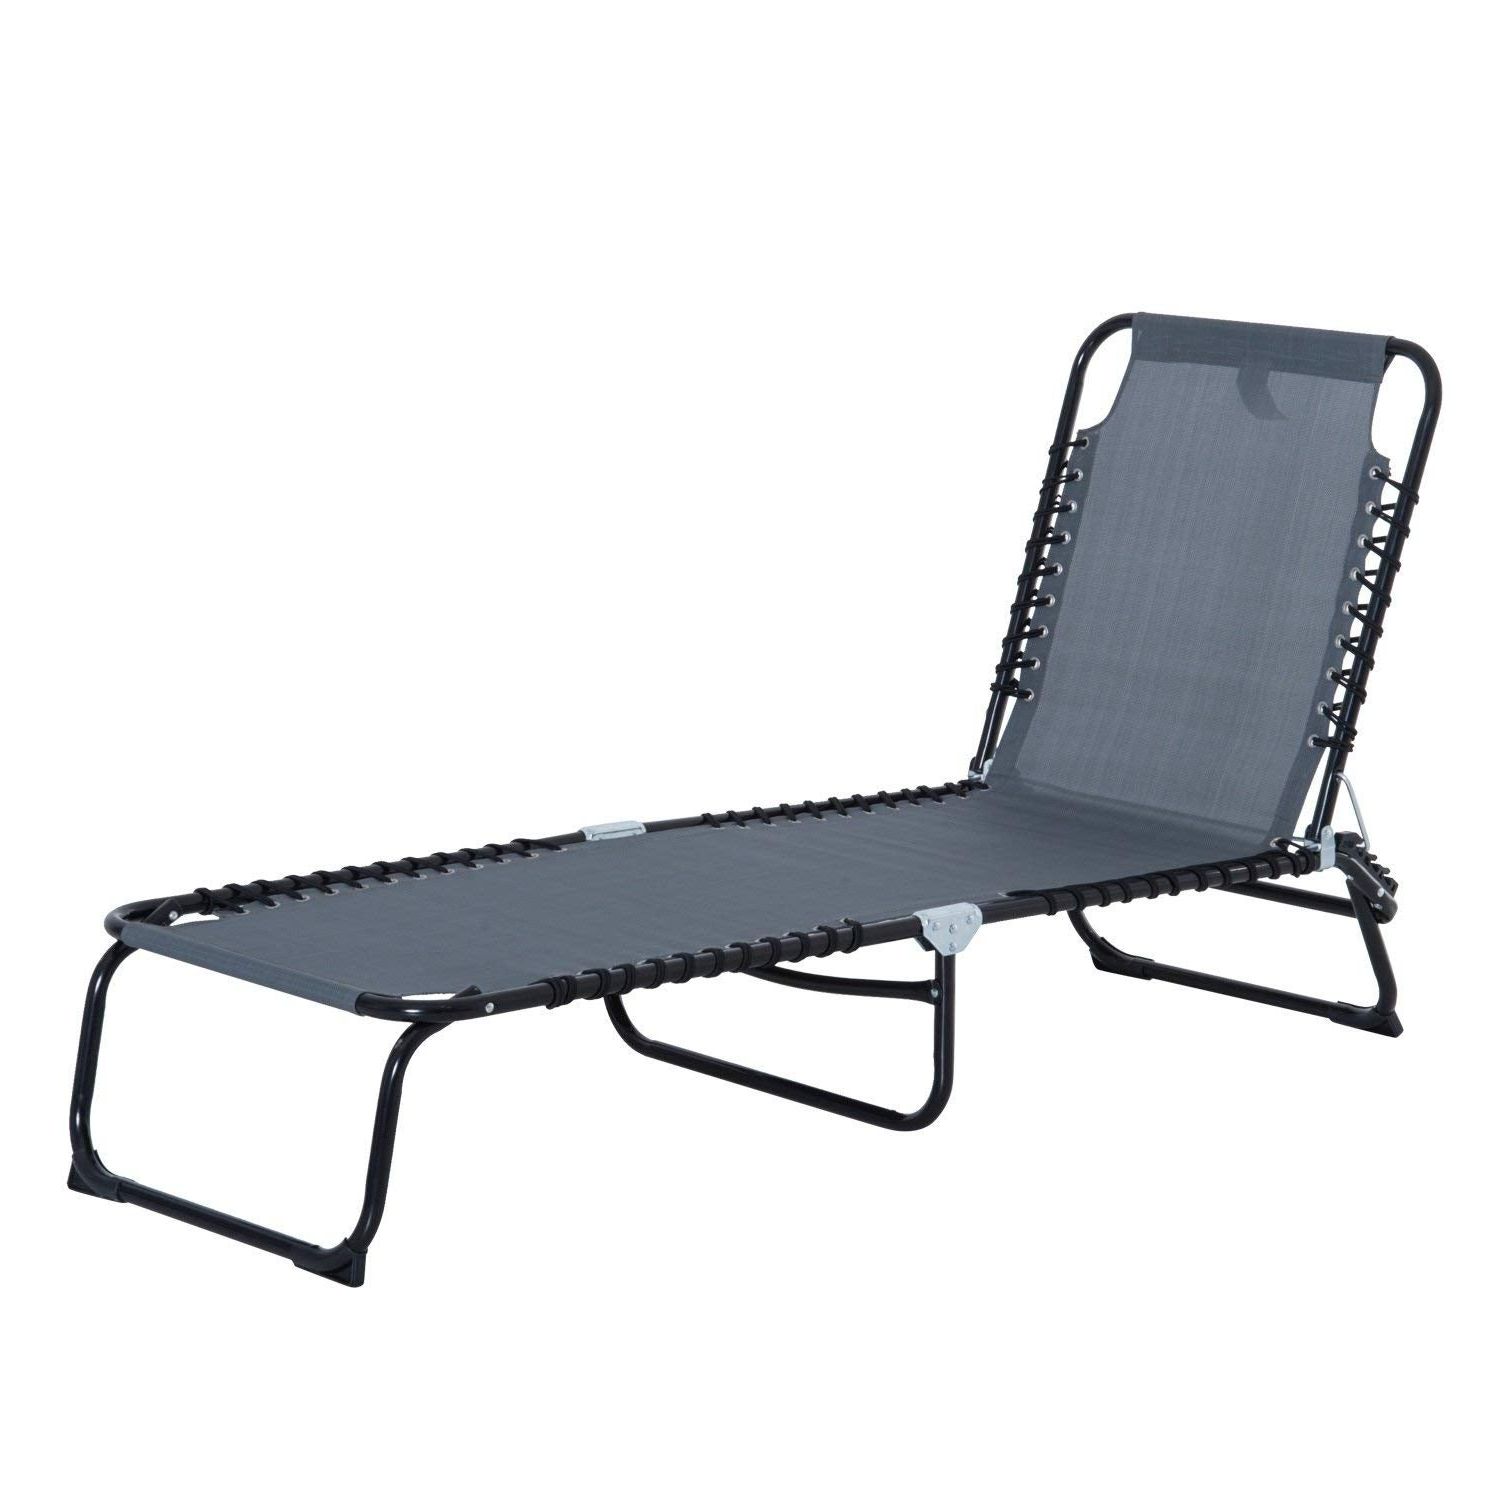 Portable Extendable Folding Reclining Chairs Within 2020 Outsunny 3 Position Portable Reclining Beach Chaise Lounge Folding Chair  Outdoor Patio – Grey (View 12 of 25)